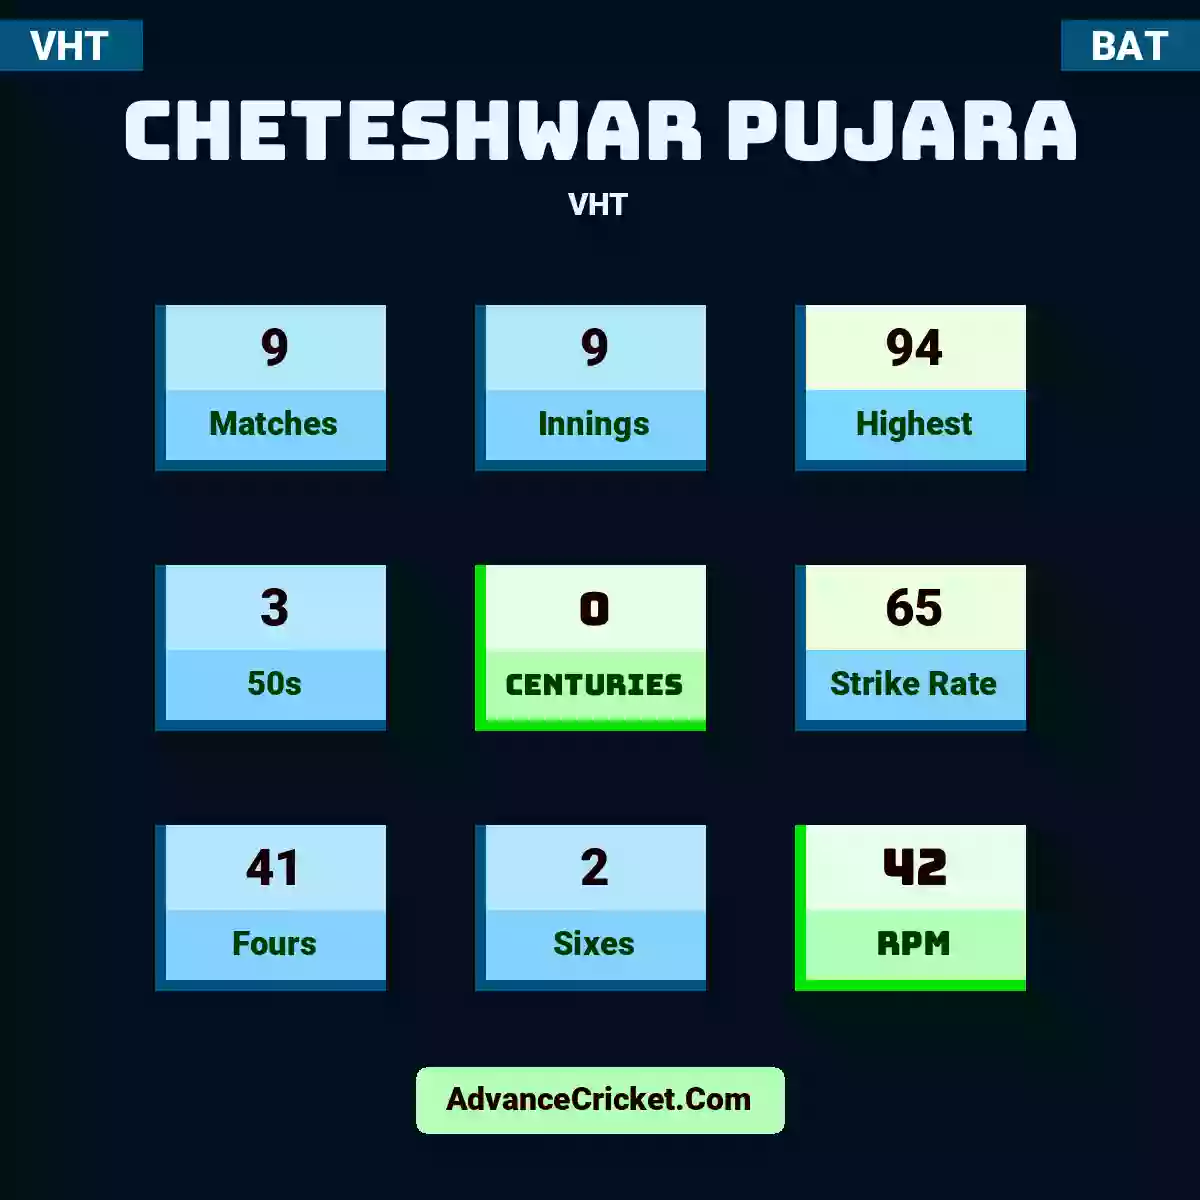 Cheteshwar Pujara VHT , Cheteshwar Pujara played 9 matches, scored 94 runs as highest, 3 half-centuries, and 0 centuries, with a strike rate of 65. C.Pujara hit 41 fours and 2 sixes, with an RPM of 42.